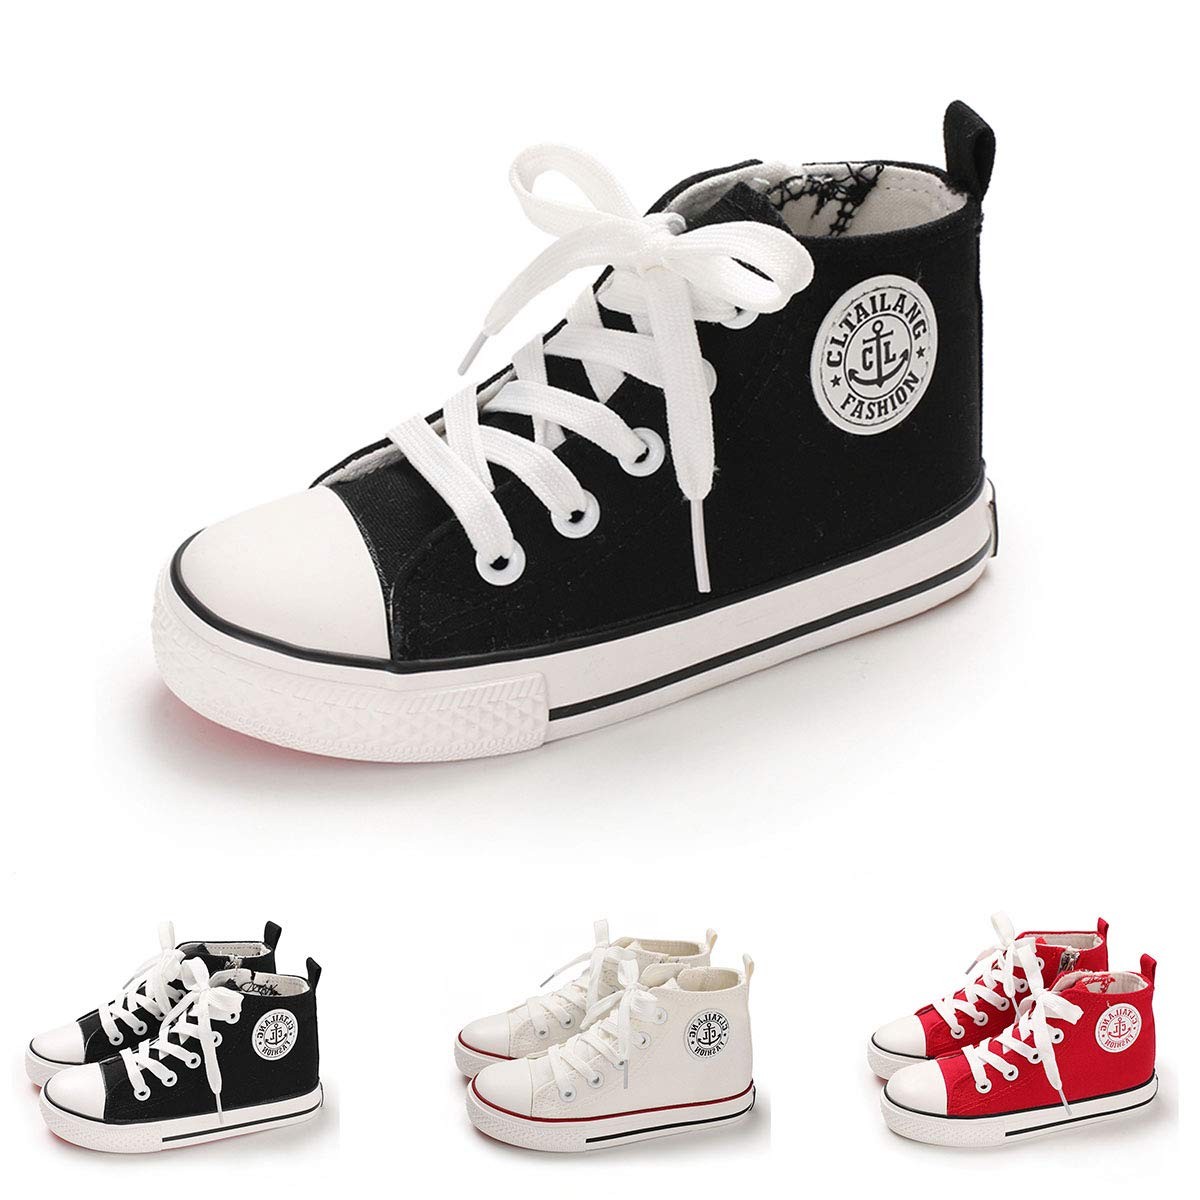 Kids Boys Girls Canvas High Top Gym Shoes Trainers Sneakers(Toddler/Little Kid/Big Kid)